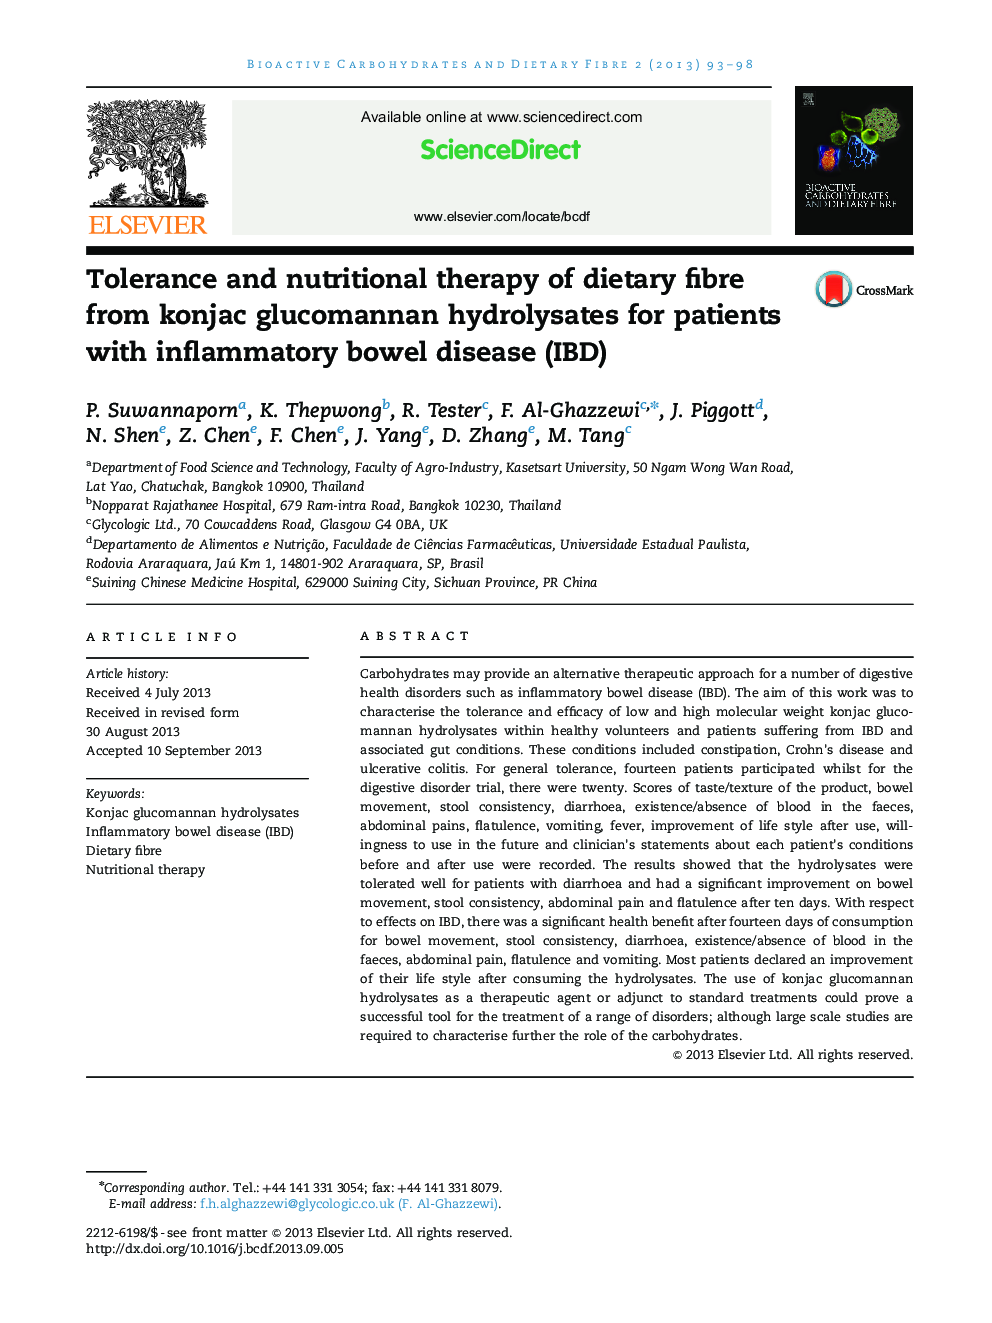 Tolerance and nutritional therapy of dietary fibre from konjac glucomannan hydrolysates for patients with inflammatory bowel disease (IBD)